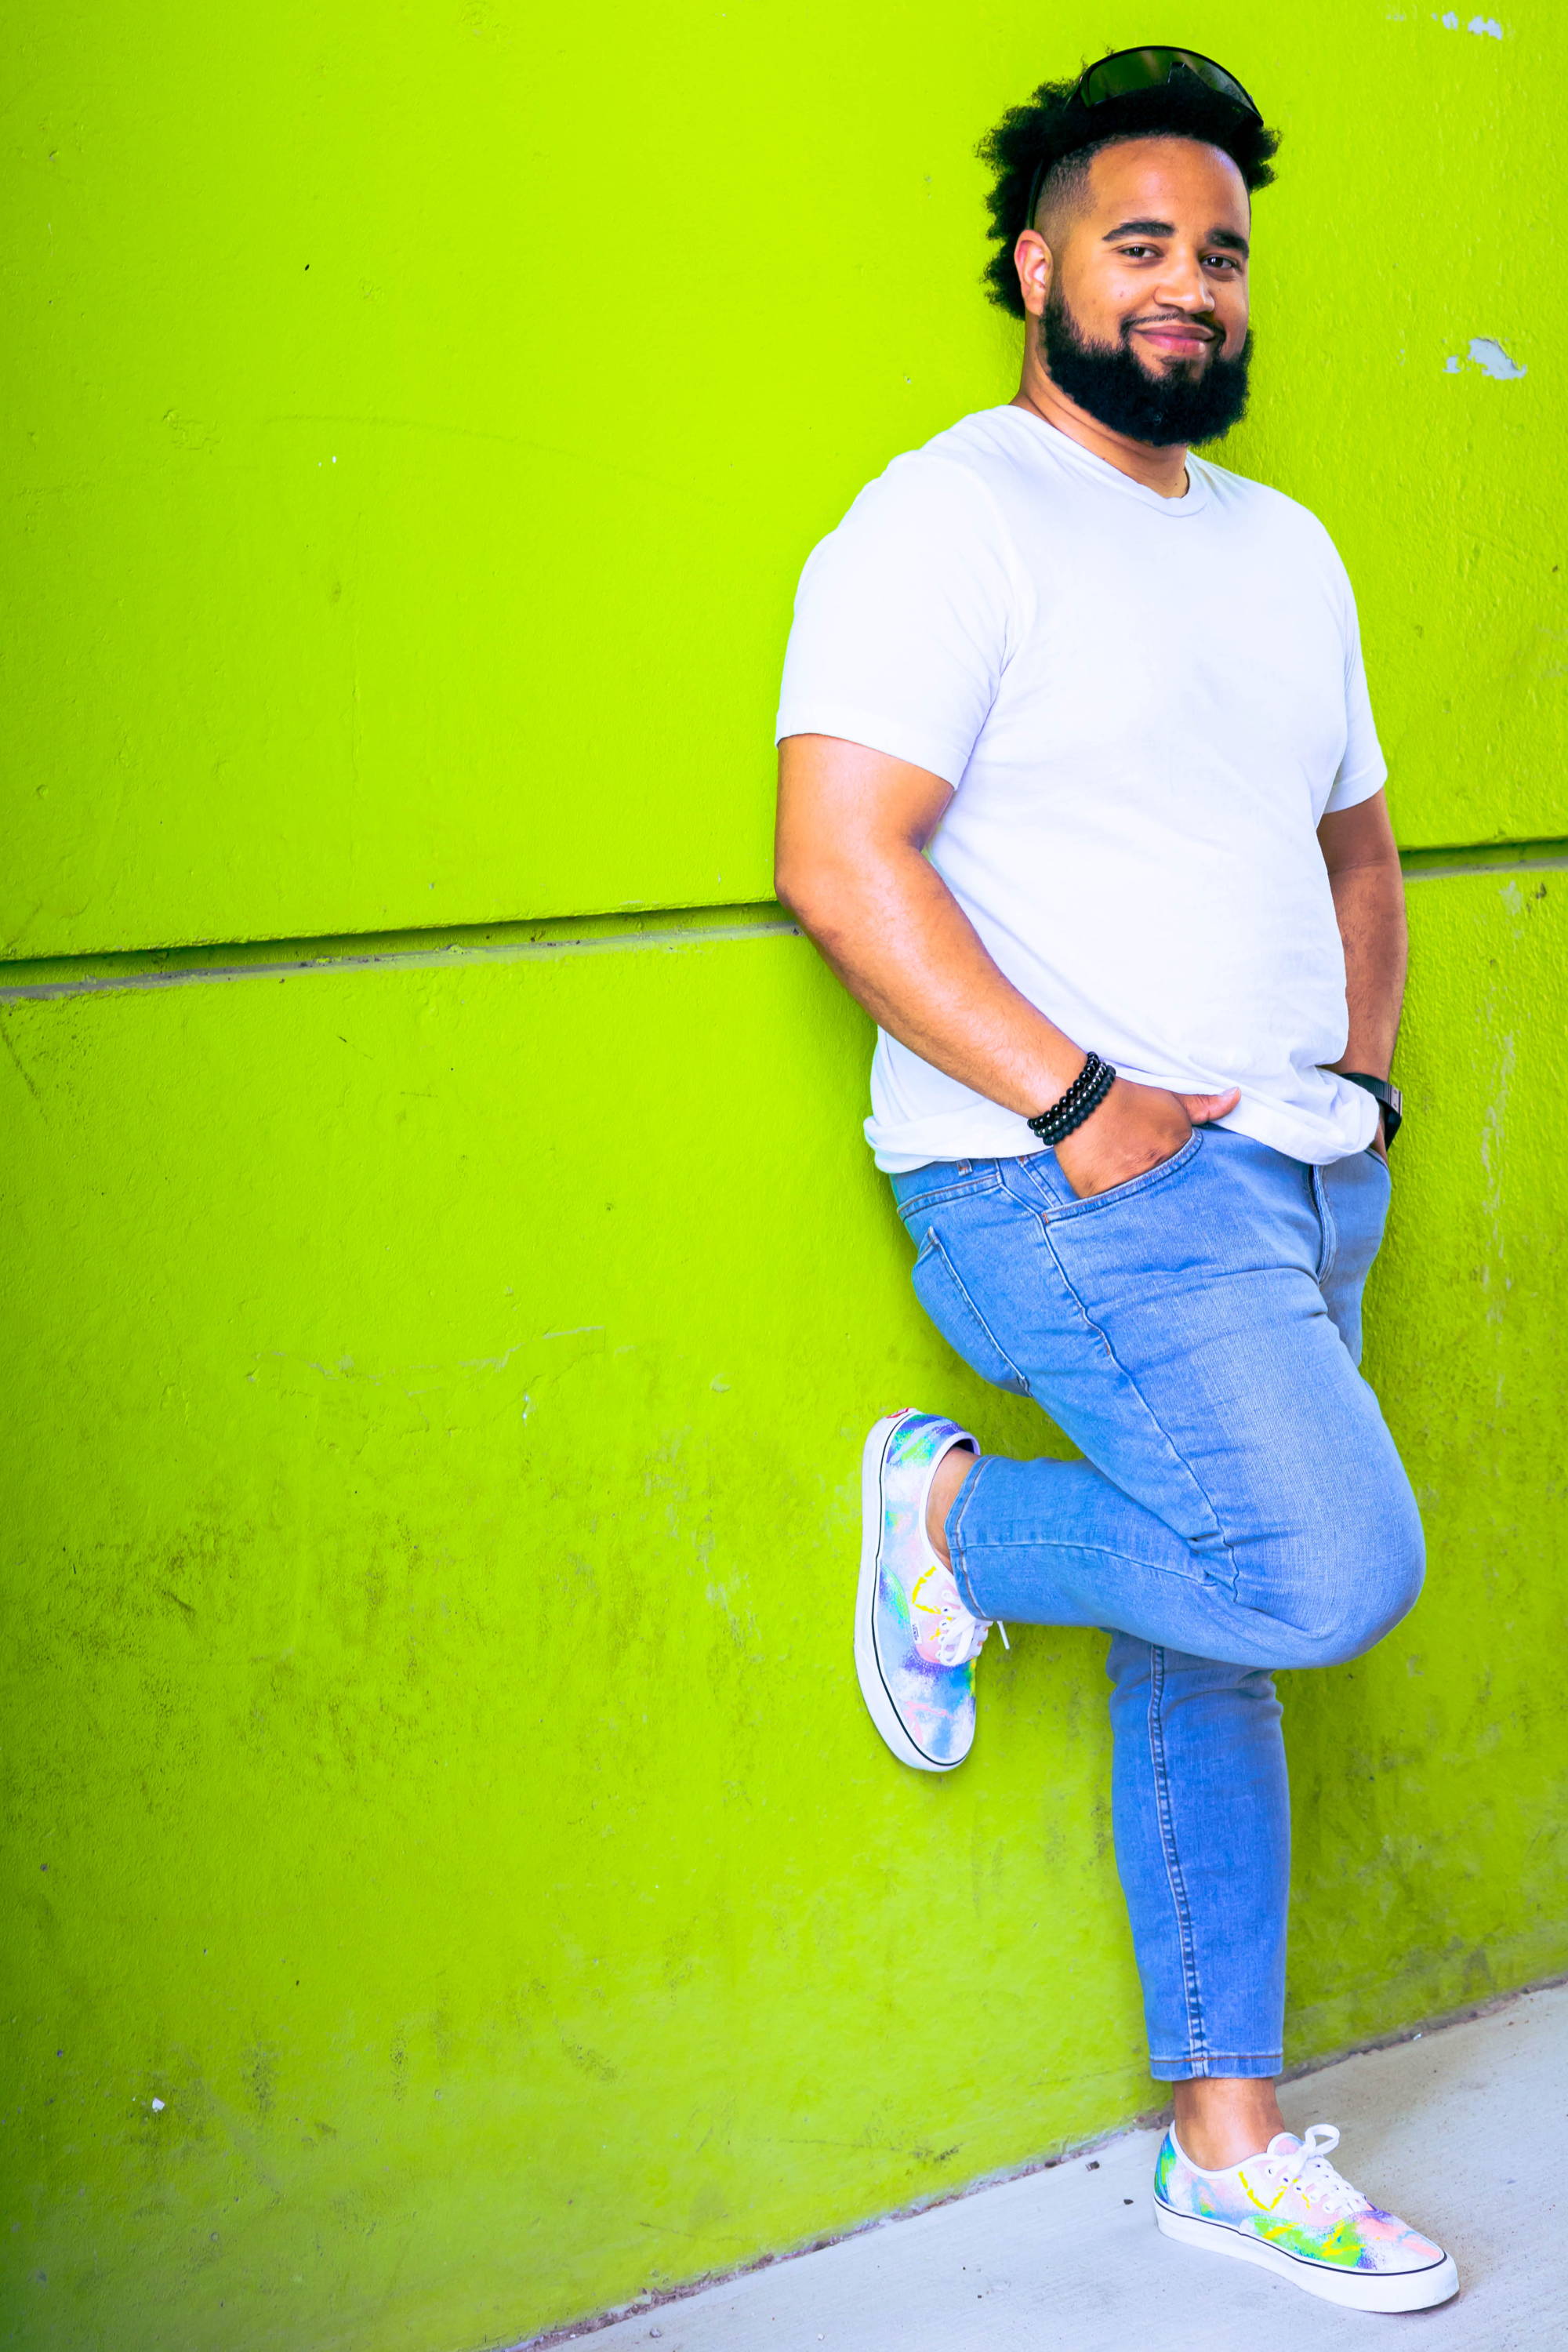 Happy guy leaning on green wall wearing white t shirt and light blue wash xavier jeans from under510.com